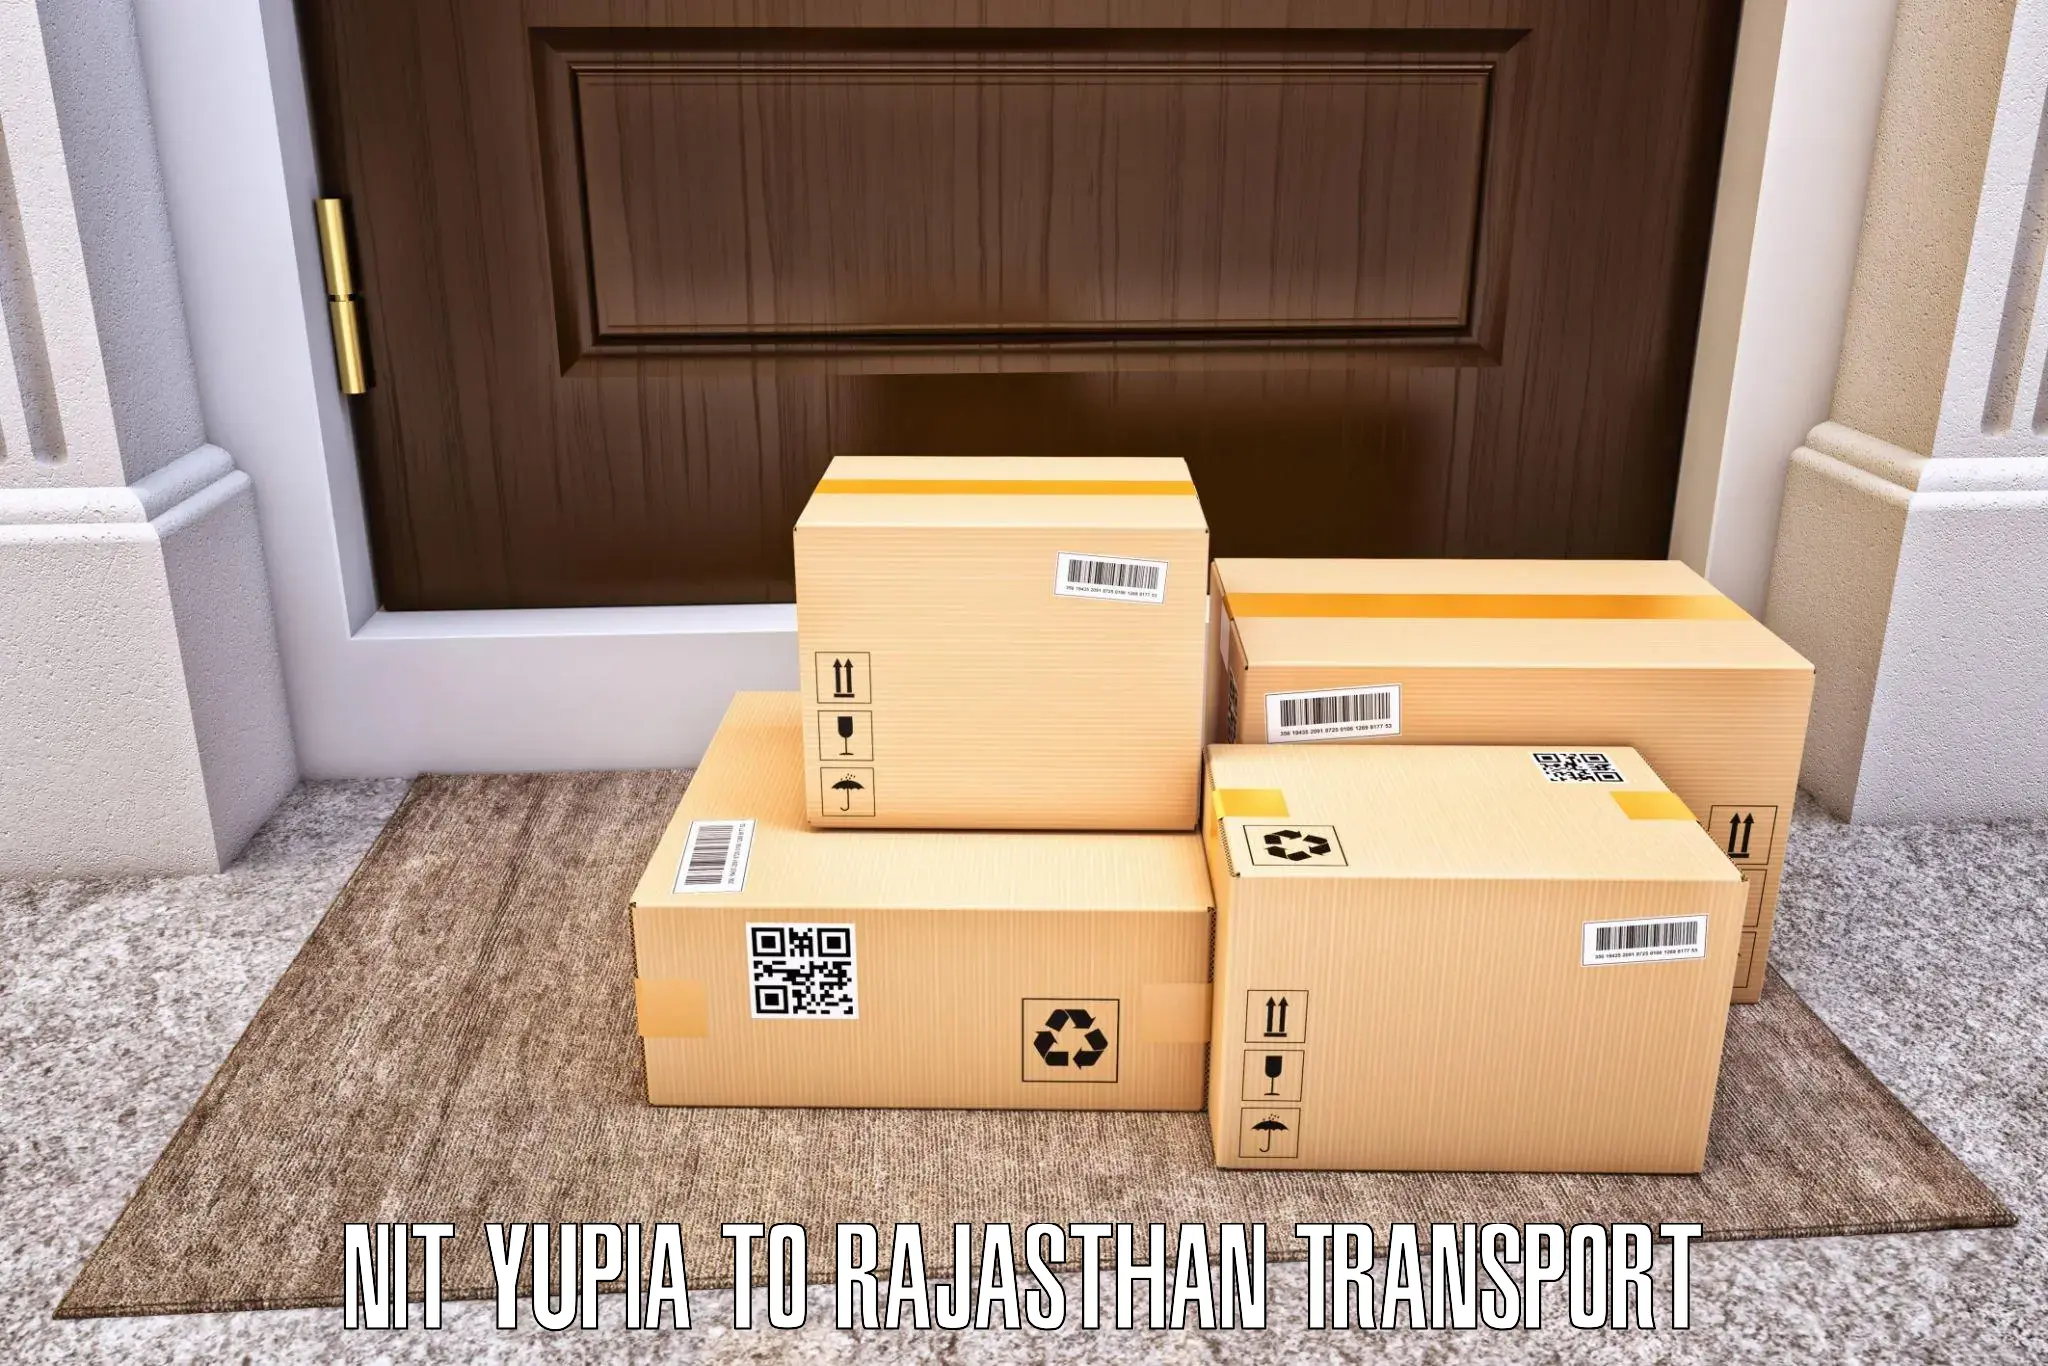 Delivery service NIT Yupia to Rajasthan